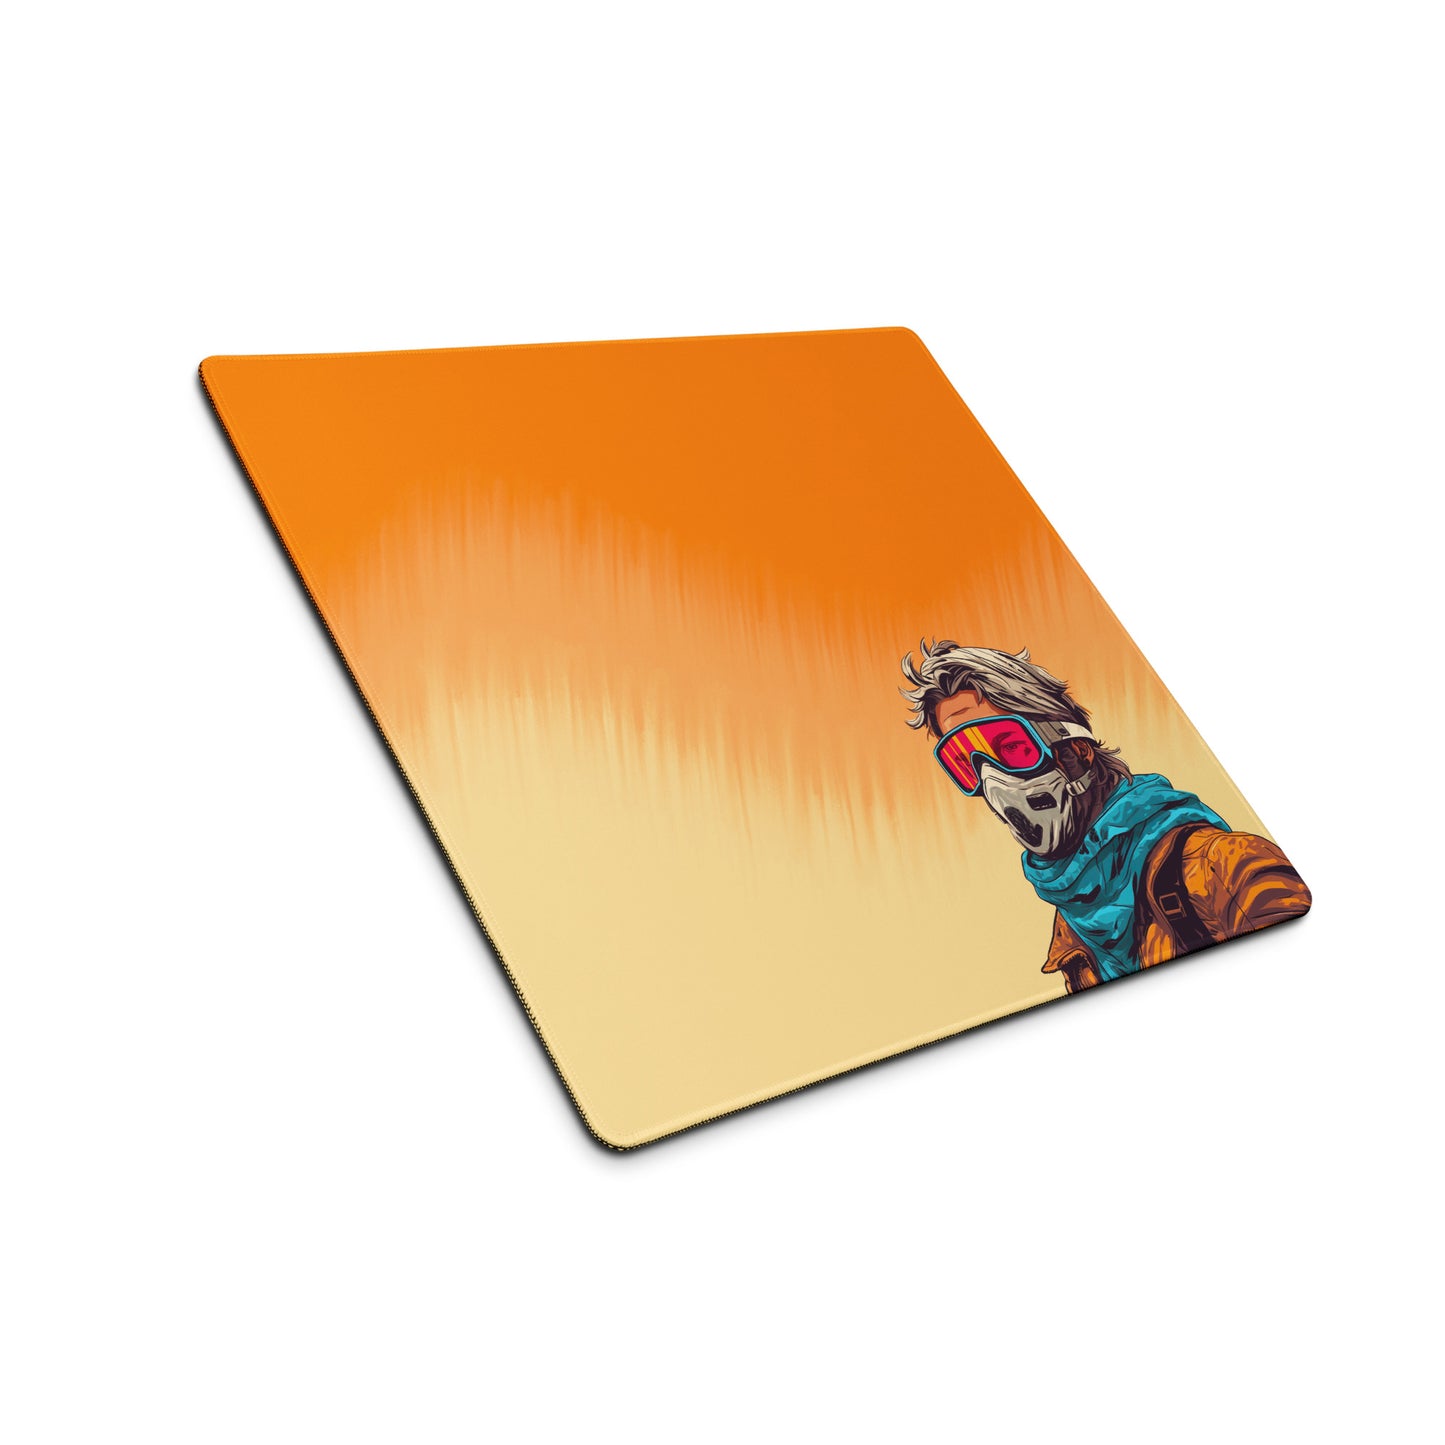 A 18" x 16" desk pad with a man standing in a sandstorm sitting at an angle.